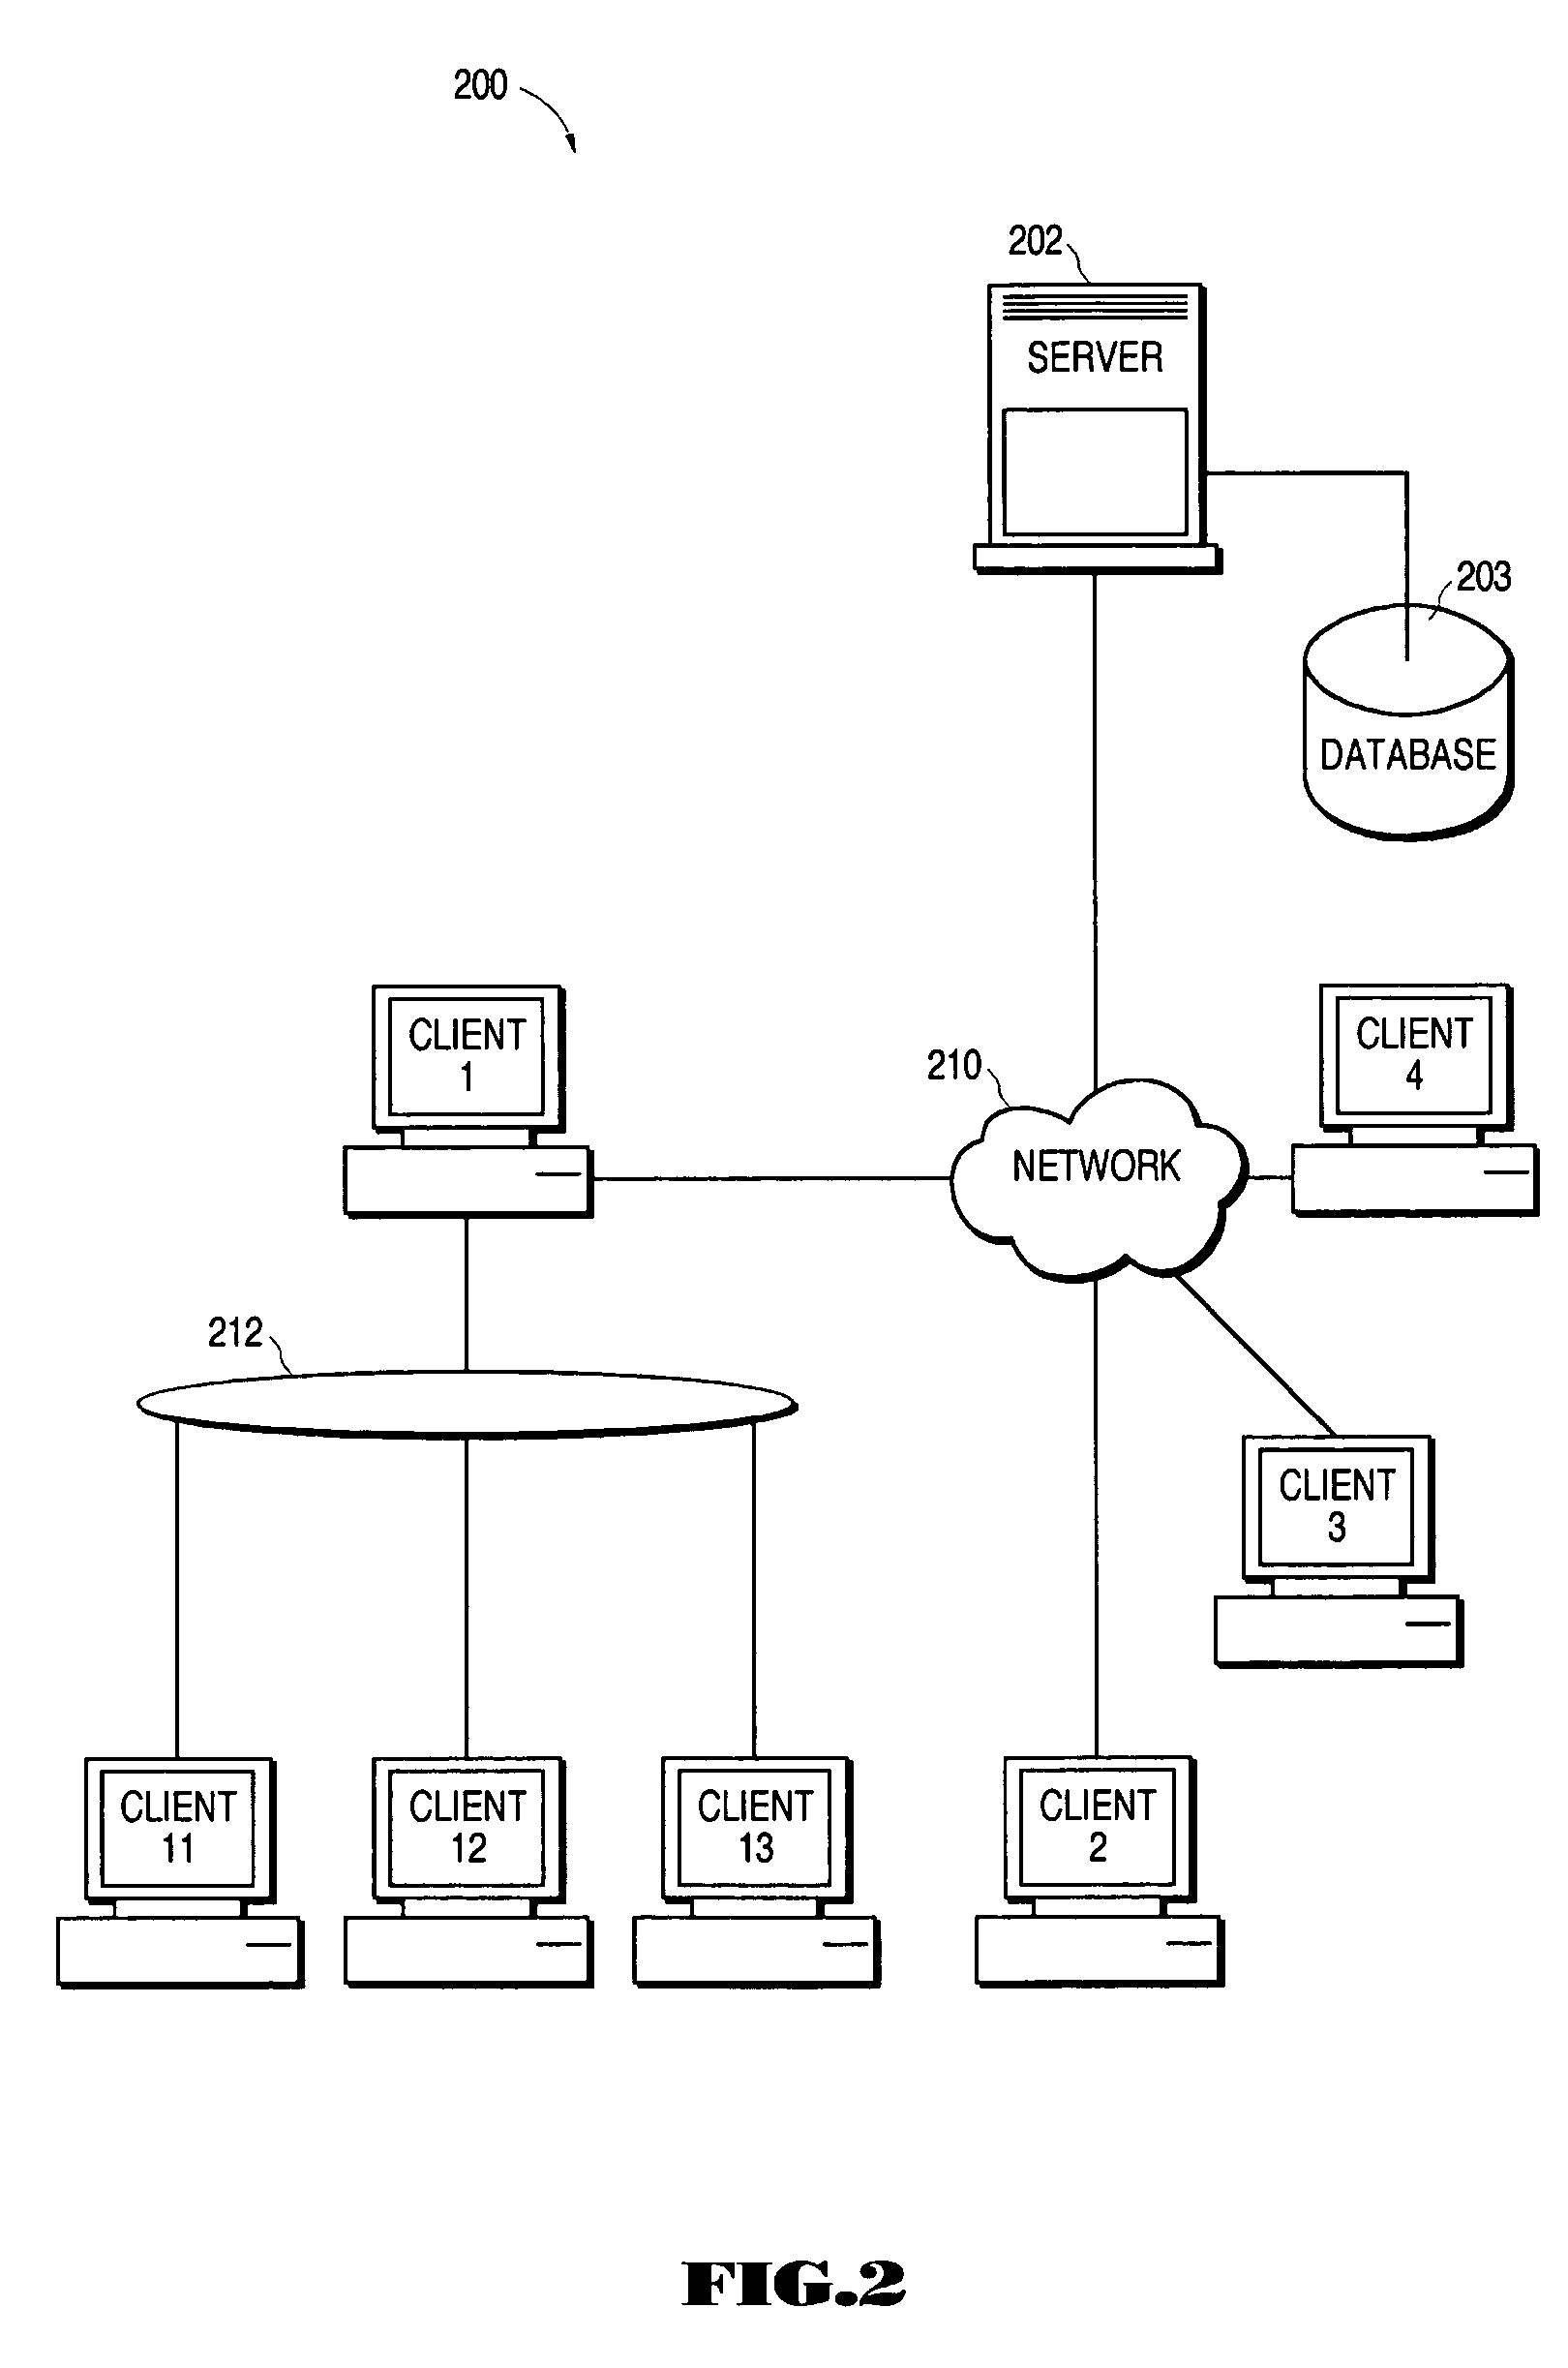 Enterprise security management system using hierarchical organization and multiple ownership structure